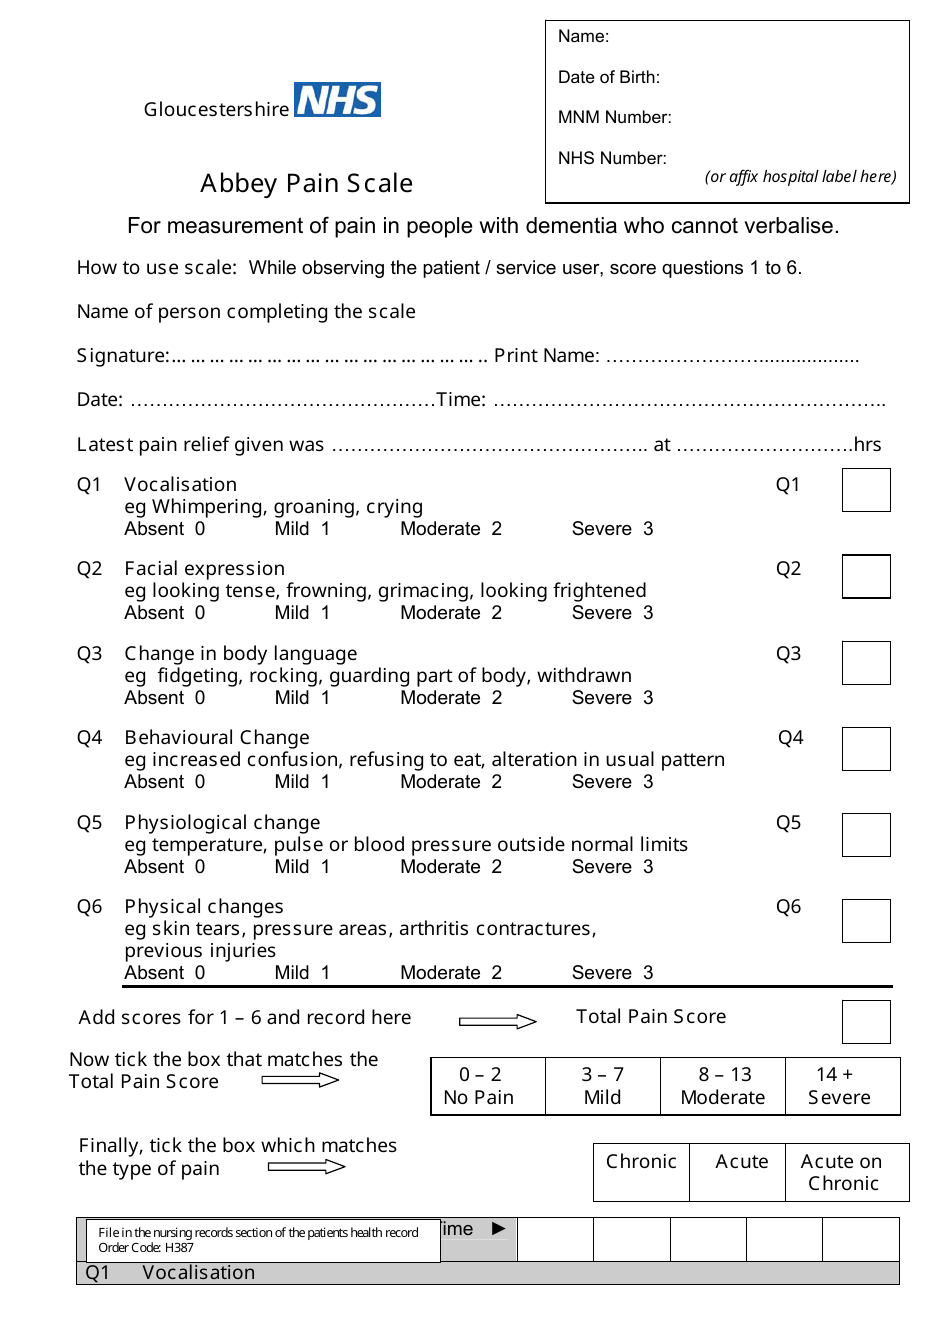 Abbey Pain Scale - Gloucestershire County, Gloucestershire, United Kingdom, Page 1